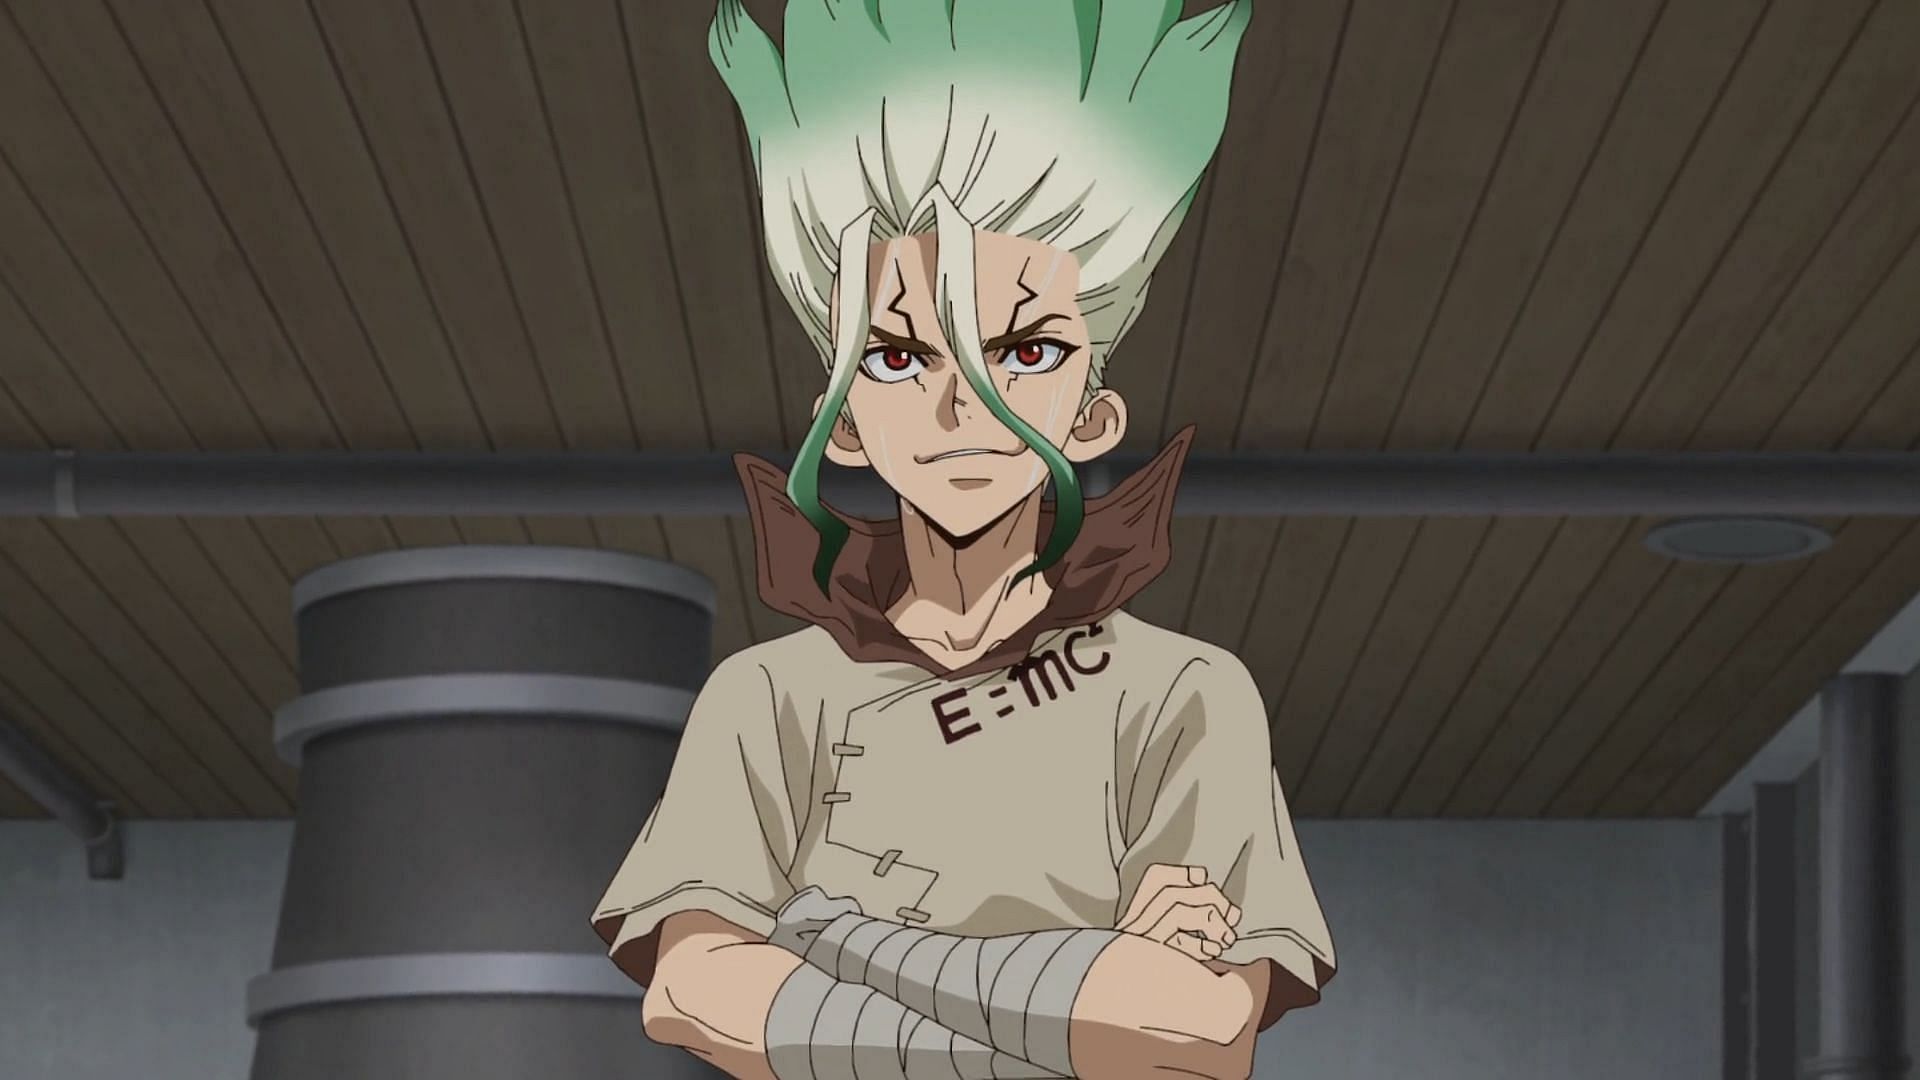 Dr. Stone season 3 episode 7 to introduce new characters (Image via TMS Entertainment)